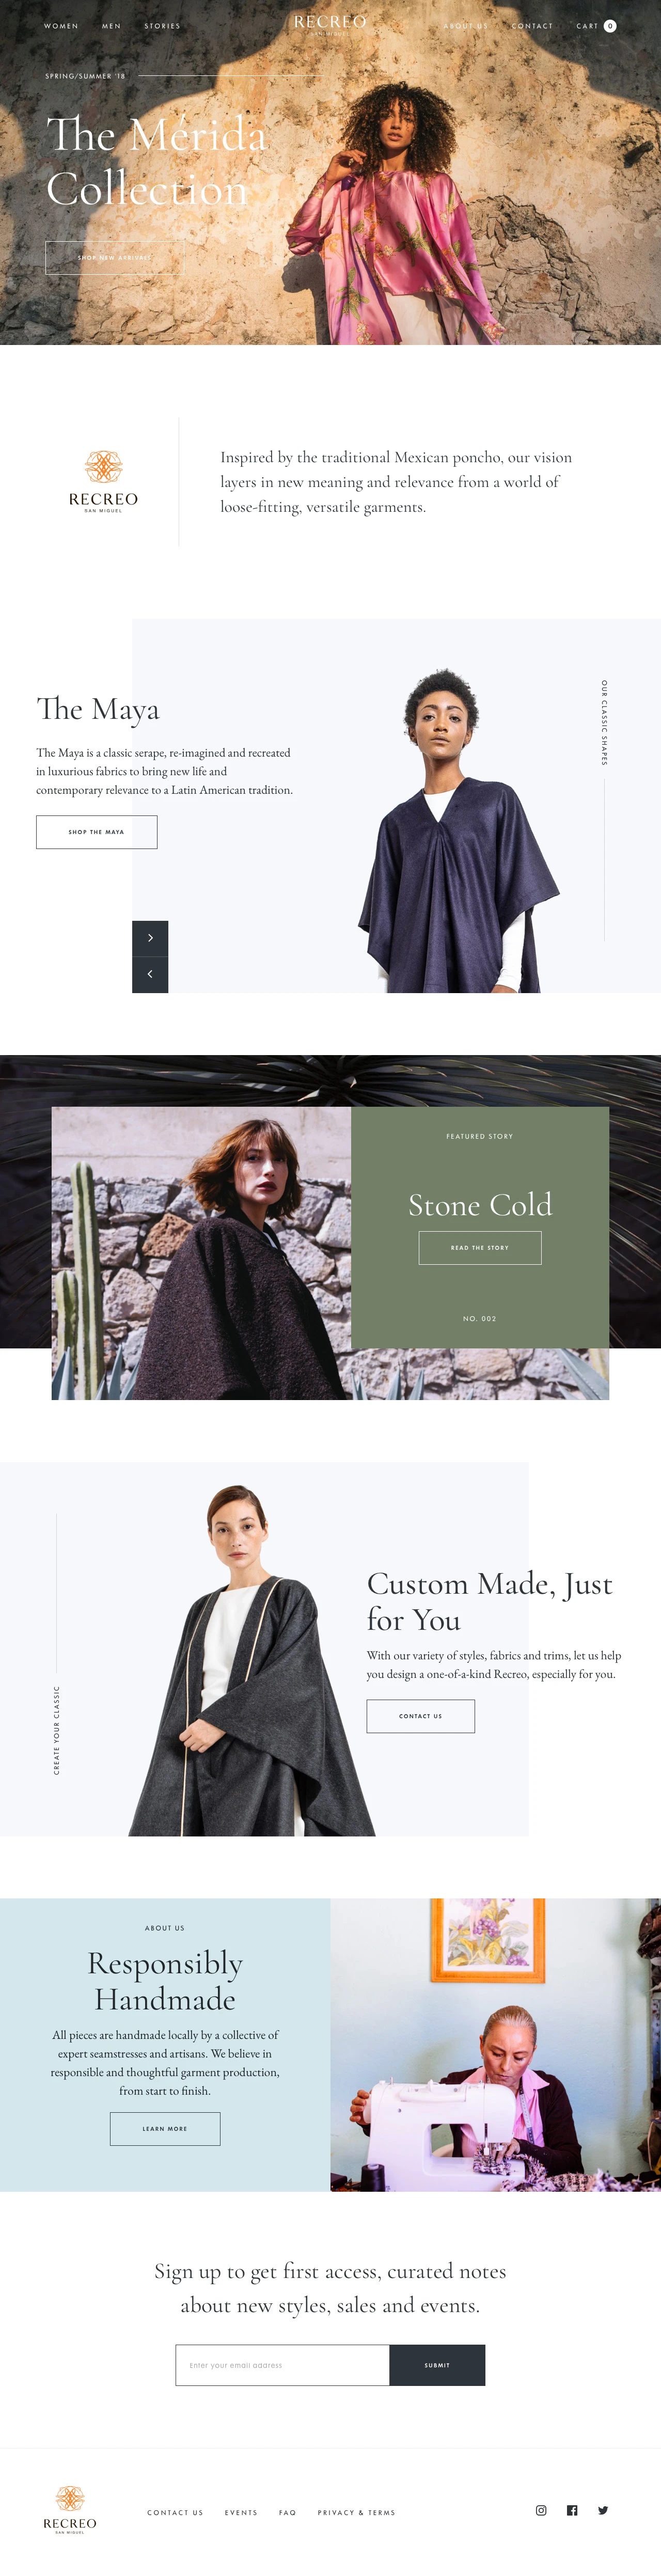 Recreo San Miguel Landing Page Example: A luxury apparel brand inspired by the rich, sophisticated colors, textures and values of Latin America. Exquisite fabrics, impeccable craftsmanship.